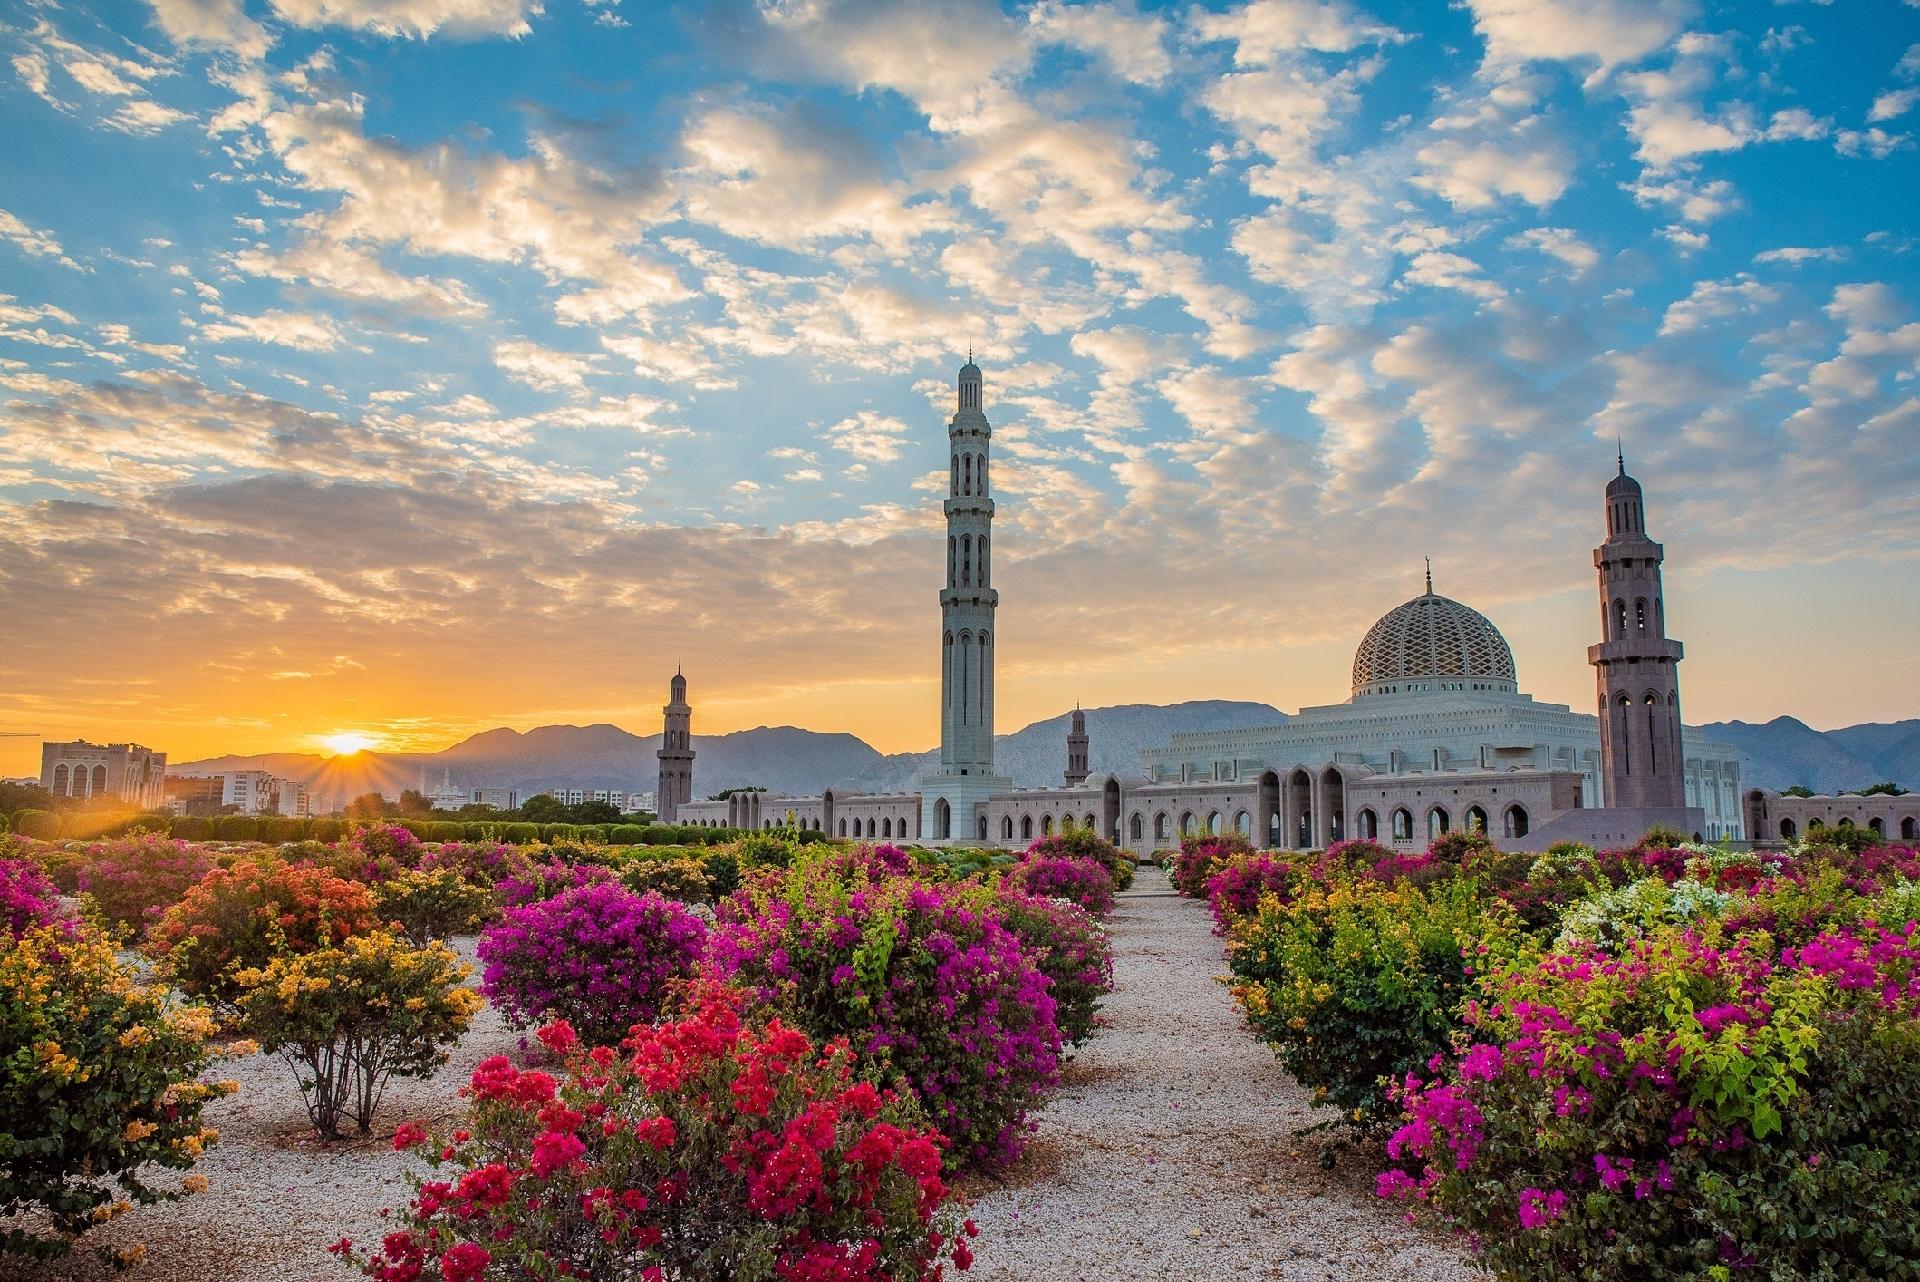 Muscat, Oman - Gopal Sutar/Getty Images/iStockphoto